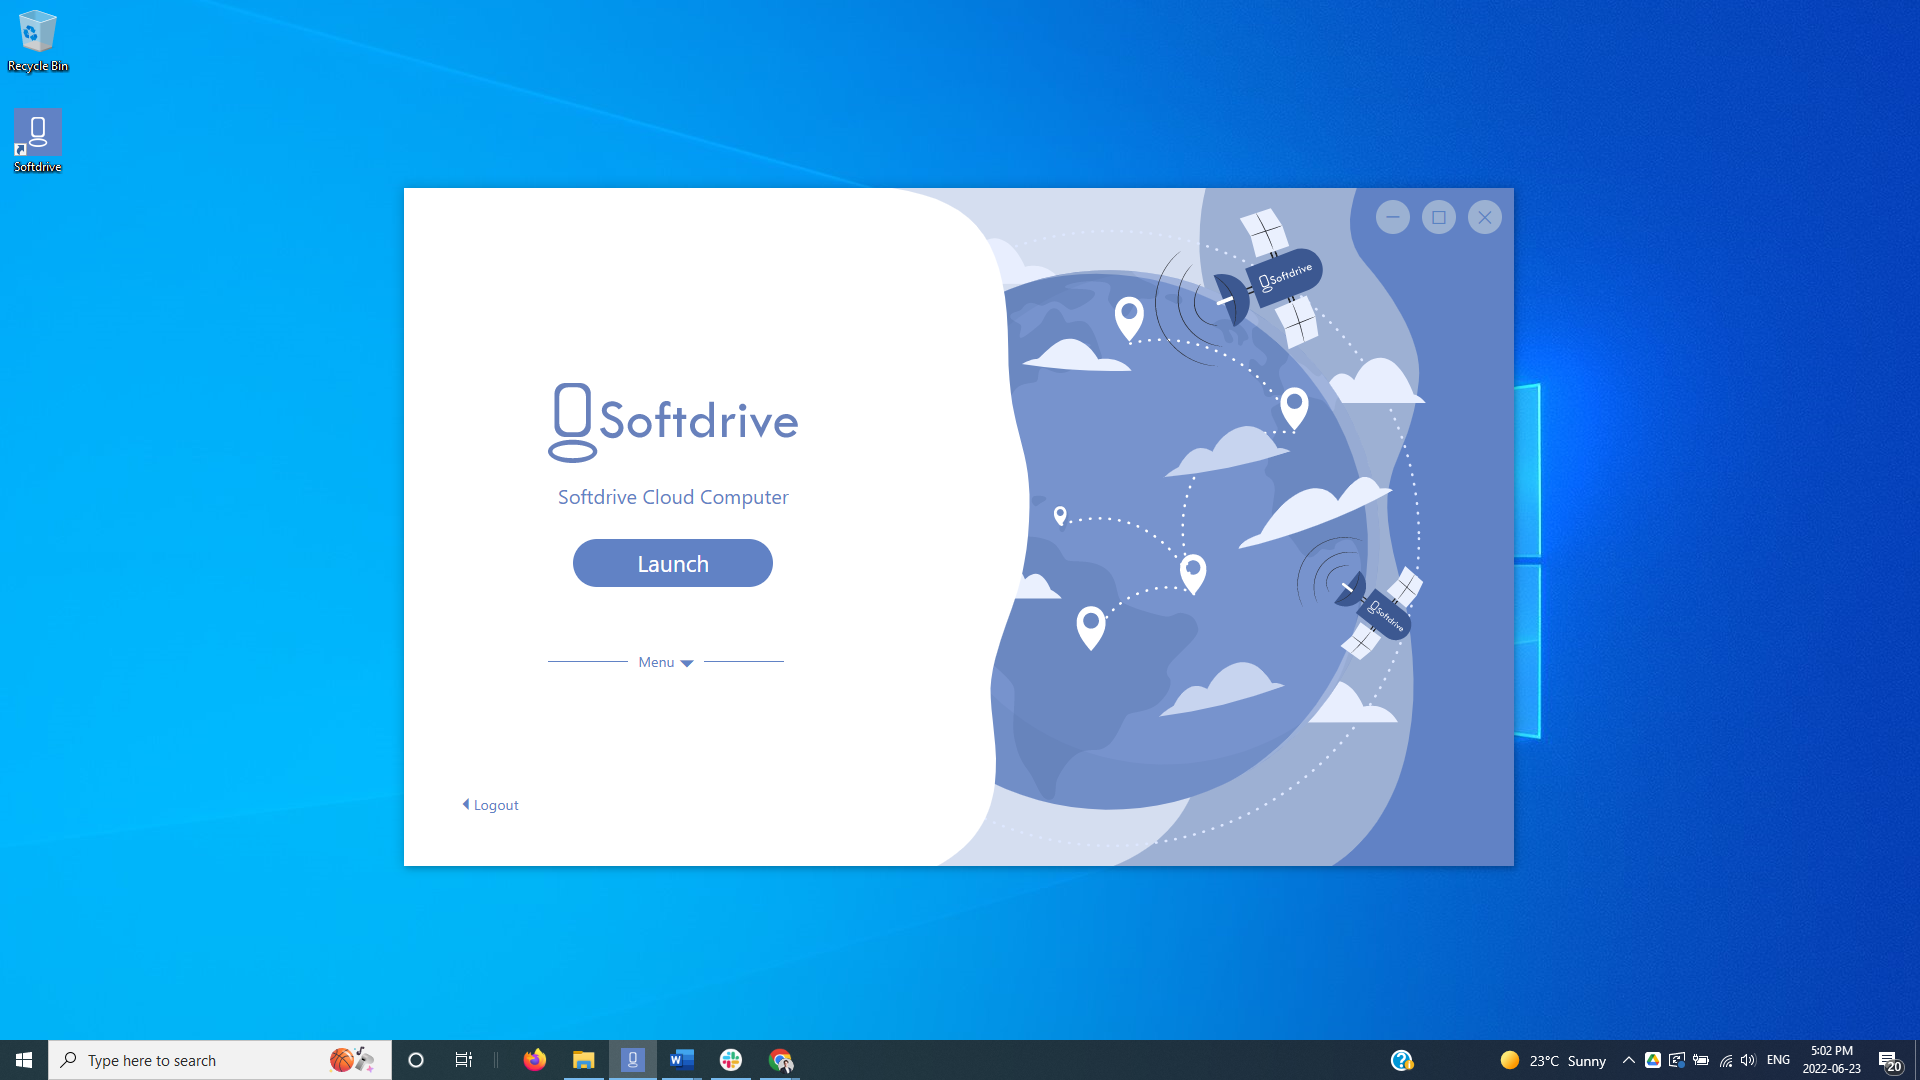 Softdrive Remote Desktop Software launching into the Softdrive Cloud PC